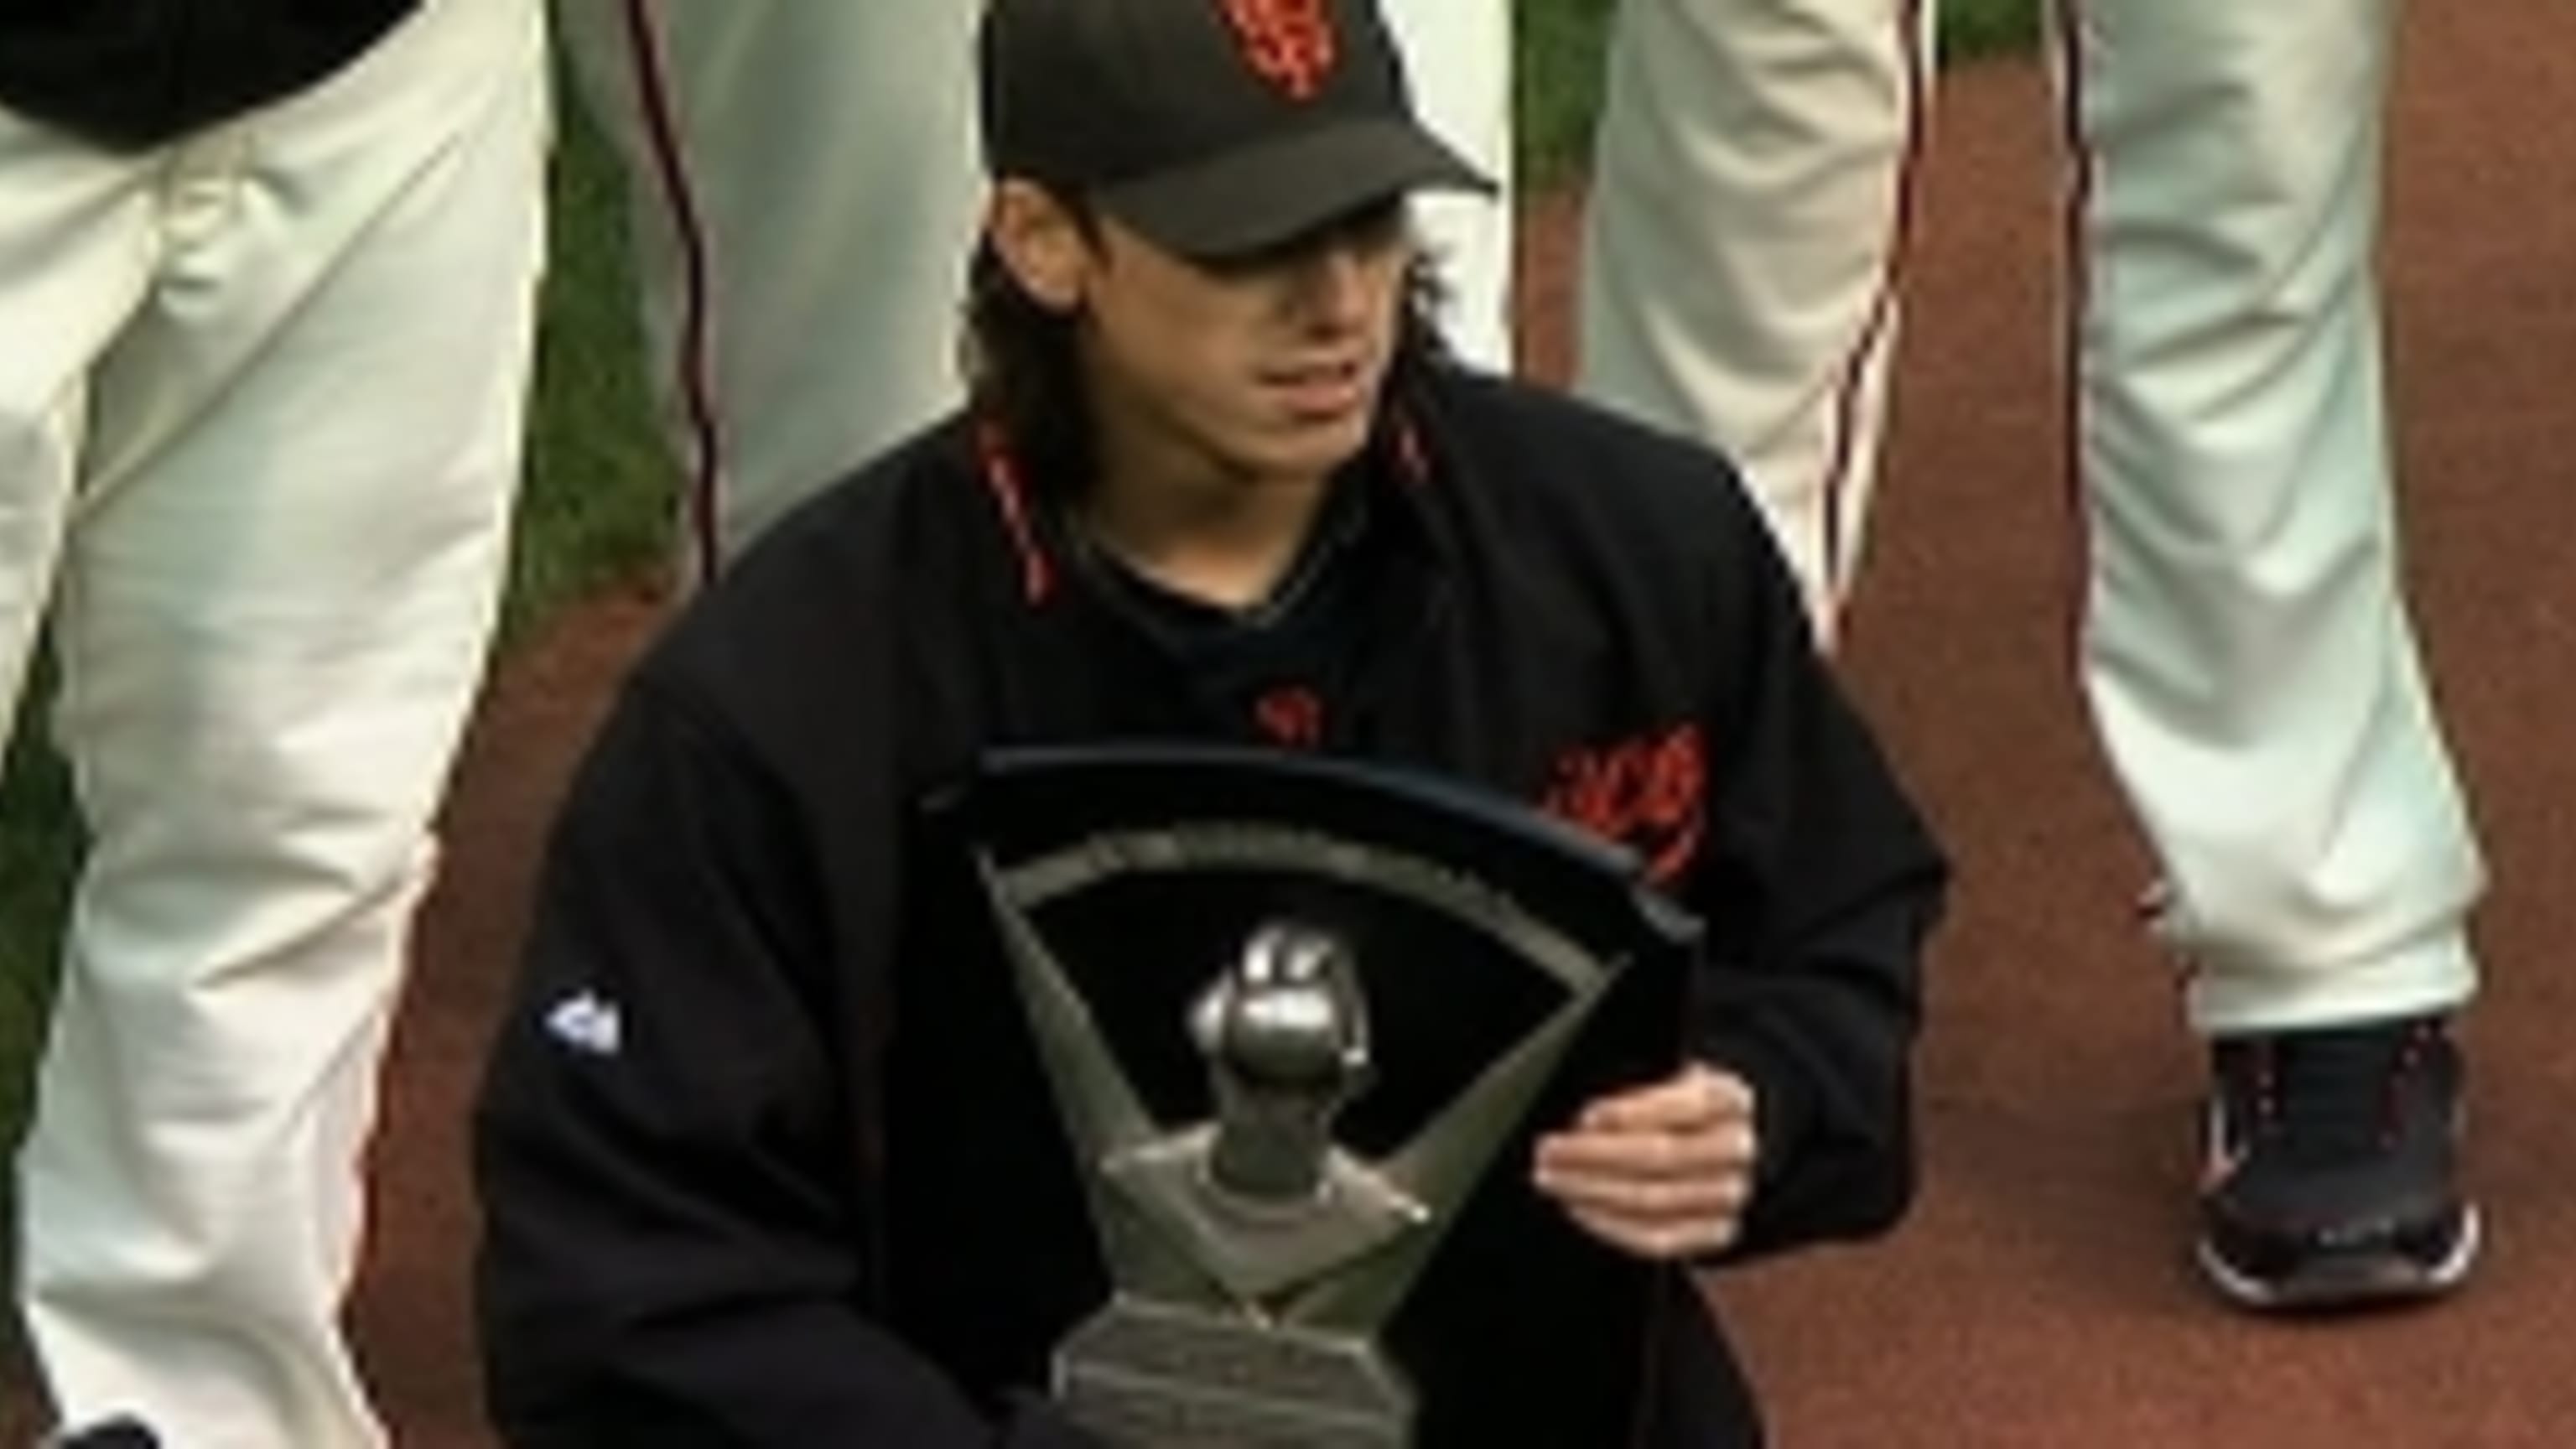 Lincecum receives Cy Young